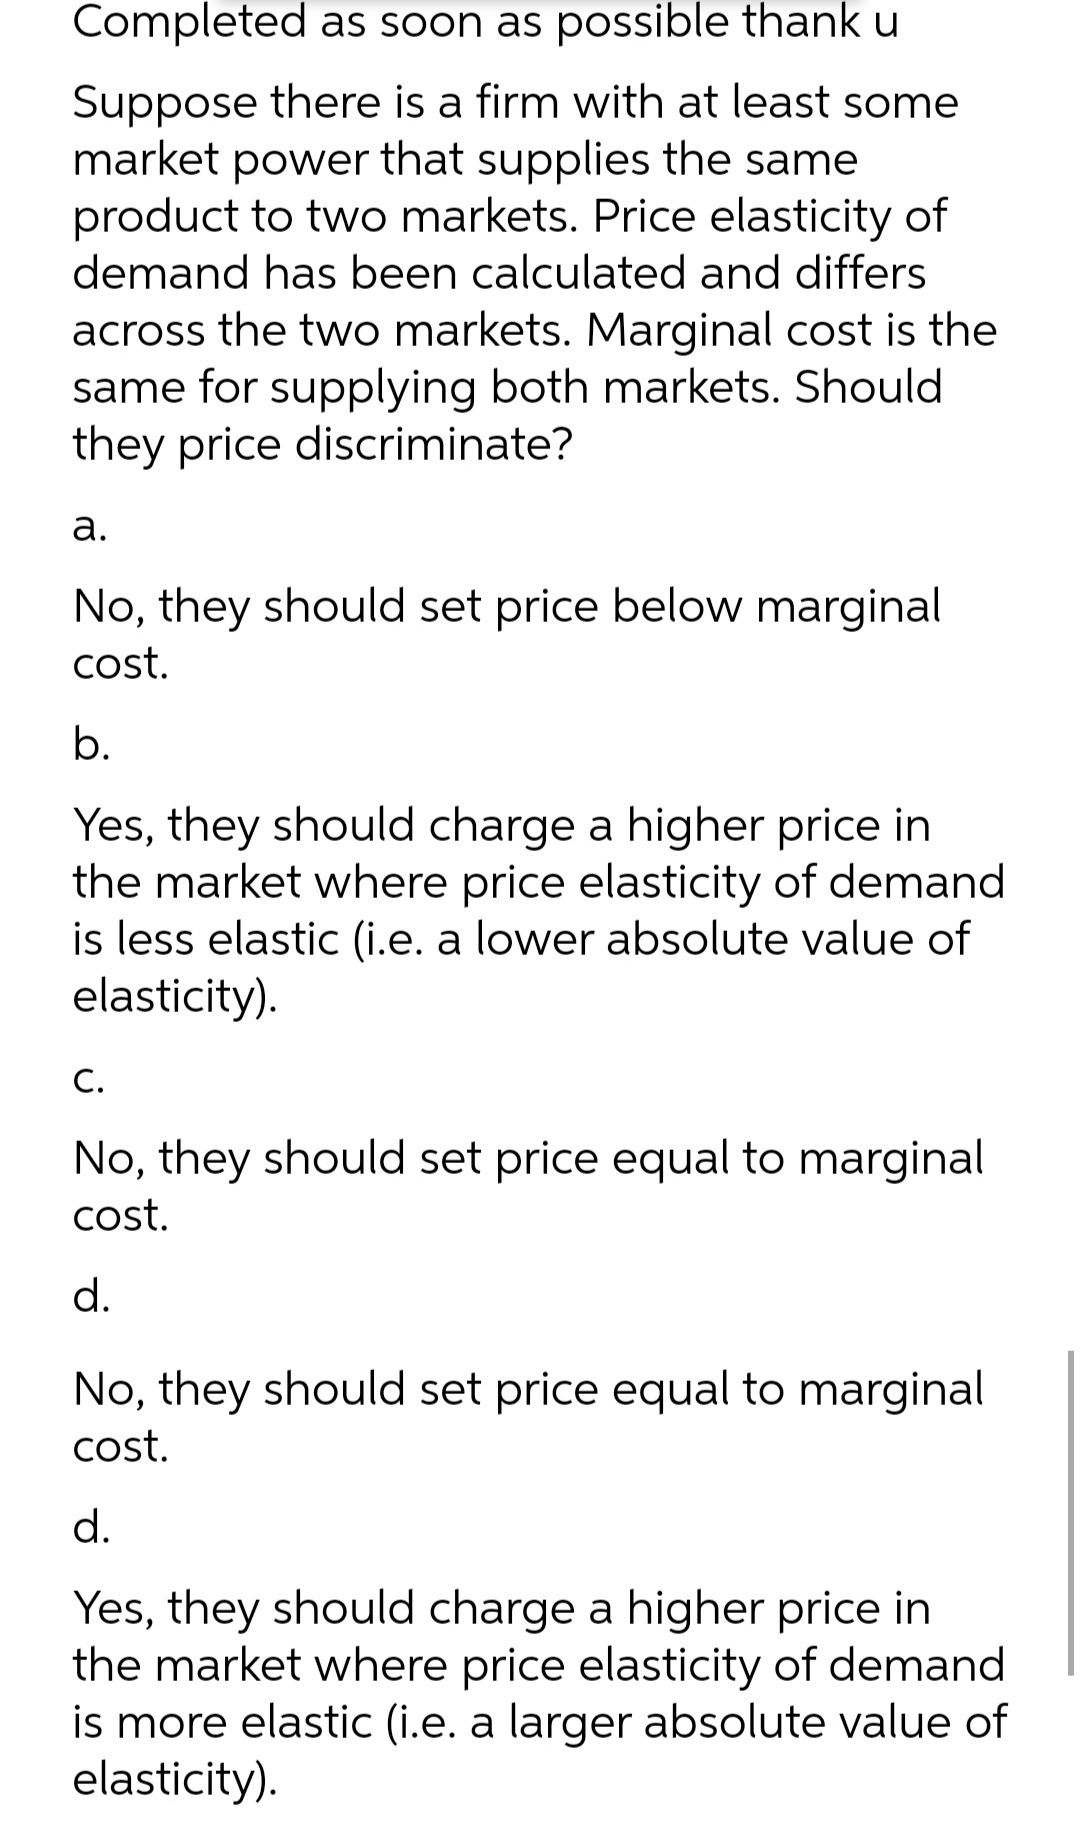 Completed as soon as possible thank u
Suppose there is a firm with at least some
market power that supplies the same
product to two markets. Price elasticity of
demand has been calculated and differs
across the two markets. Marginal cost is the
same for supplying both markets. Should
they price discriminate?
а.
No, they should set price below marginal
cost.
b.
Yes, they should charge a higher price in
the market where price elasticity of demand
is less elastic (i.e. a lower absolute value of
elasticity).
С.
No, they should set price equal to marginal
cost.
d.
No, they should set price equal to marginal
cost.
d.
Yes, they should charge a higher price in
the market where price elasticity of demand
is more elastic (i.e. a larger absolute value of
elasticity).
